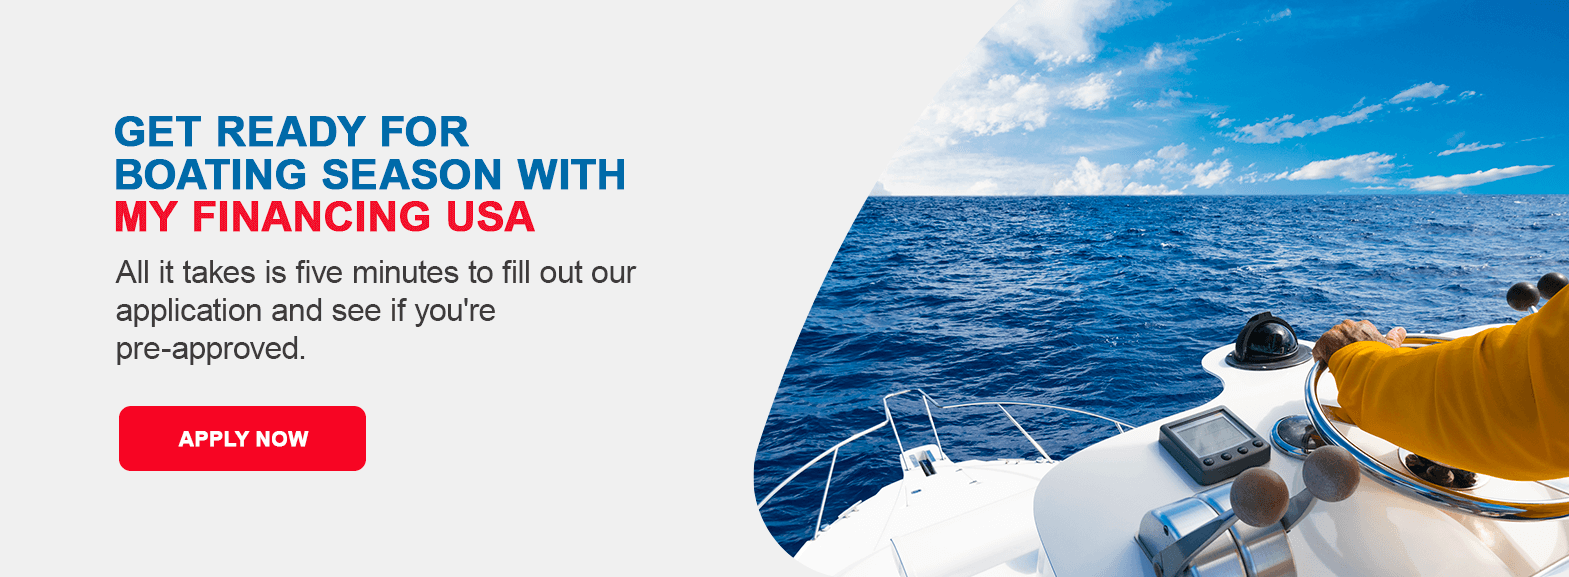 Get Ready for Boating Season With My Financing USA. All it takes is five minutes to fill out our application and see if you're pre-approved. Apply now!